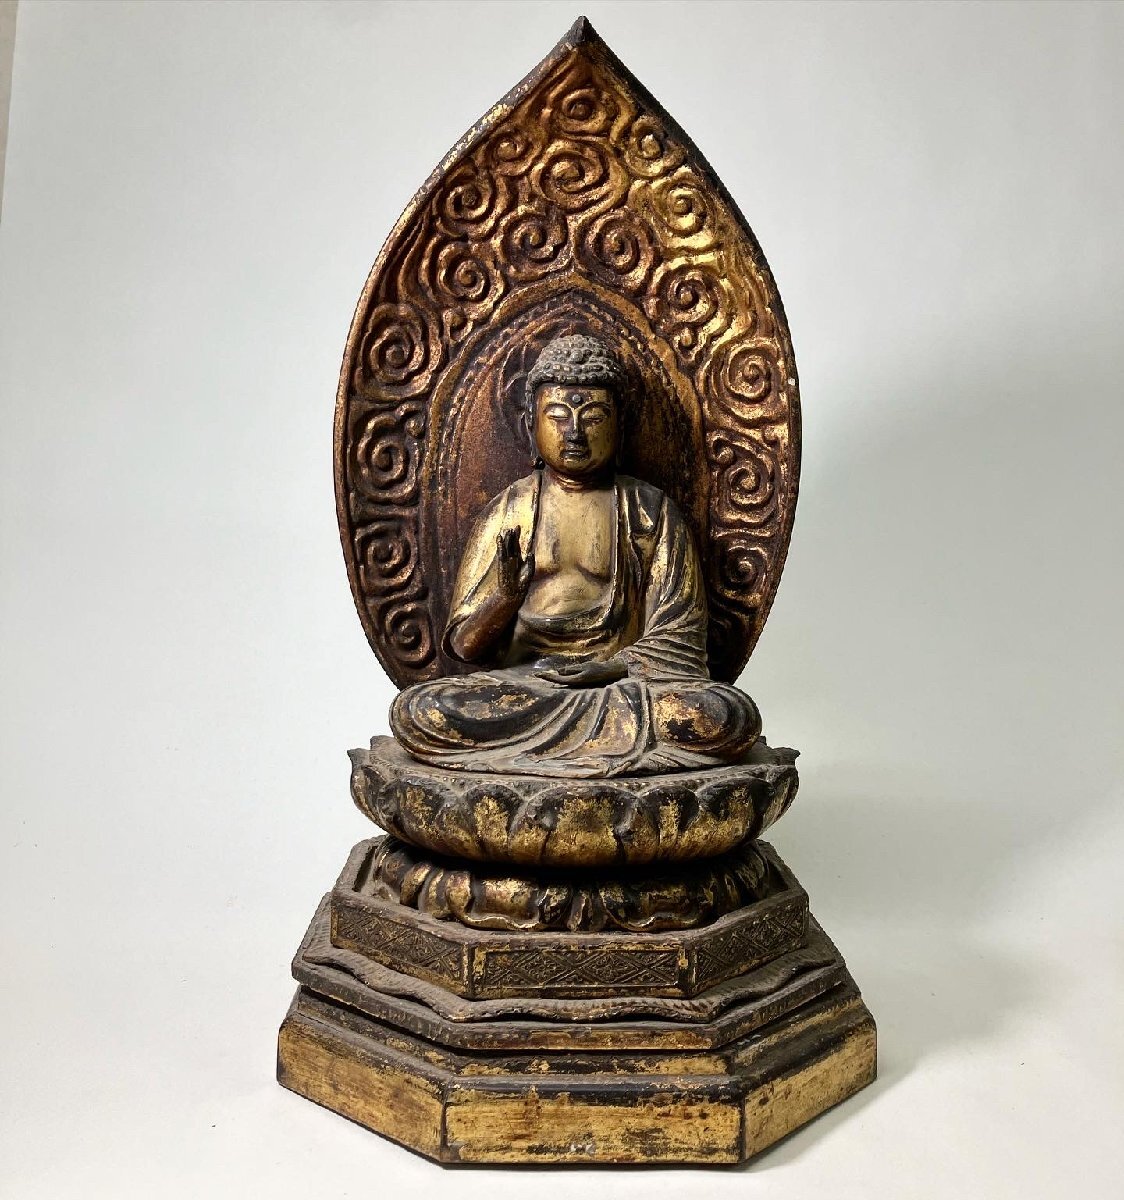 [ capital all ] Buddhism fine art tree carving sphere eye go in ...... image height :36cm era thing 